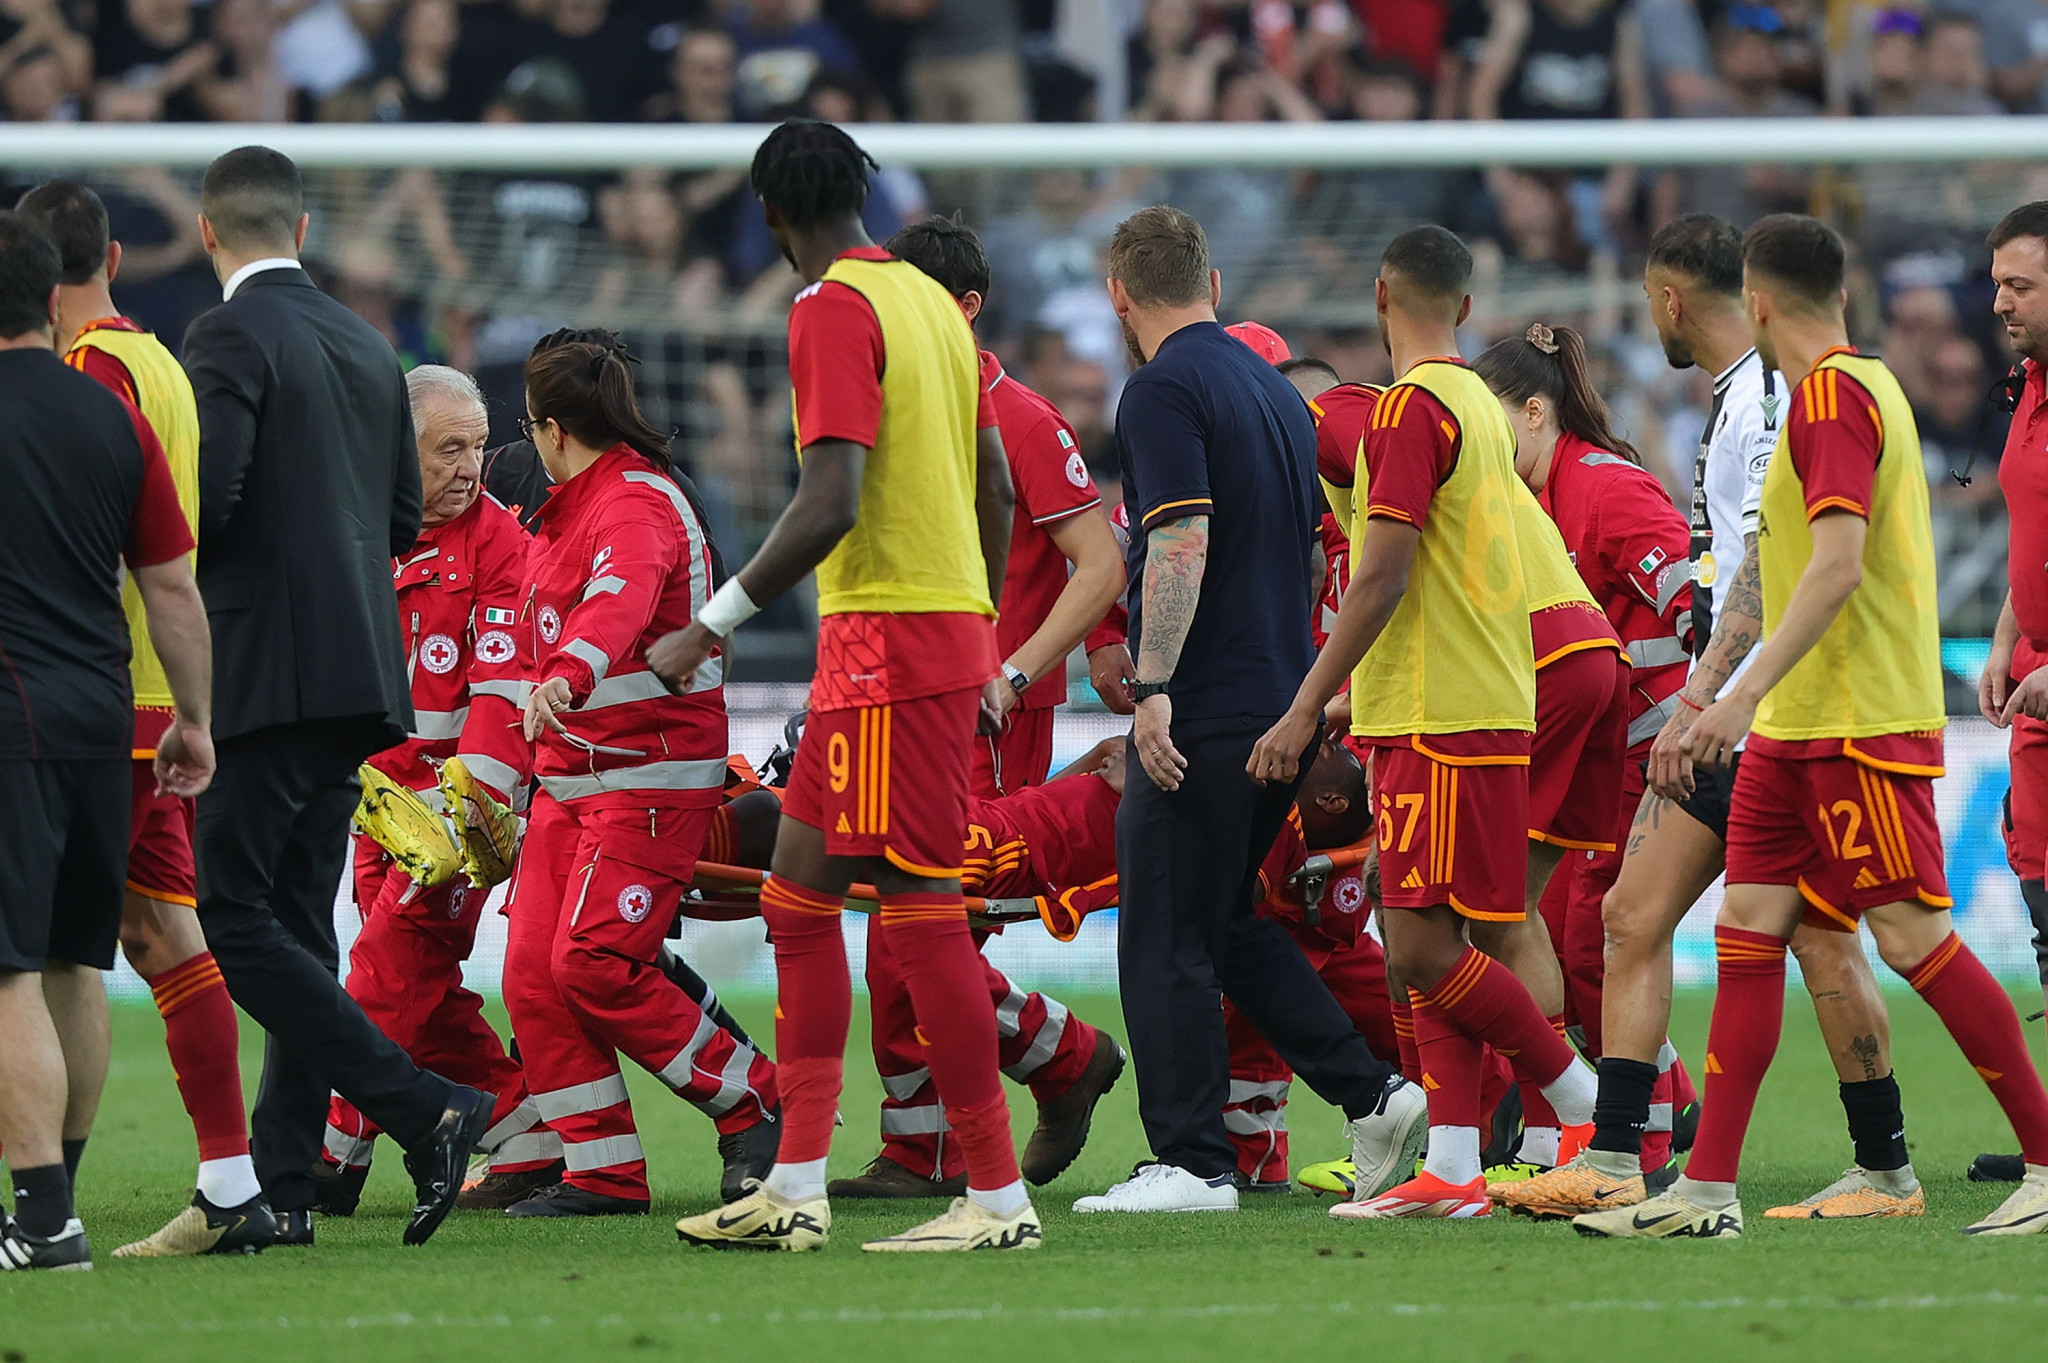 Ndicka collapsed during Roma's 1-1 draw with Udinese but has since been given the all clear by doctors. GETTY IMAGES